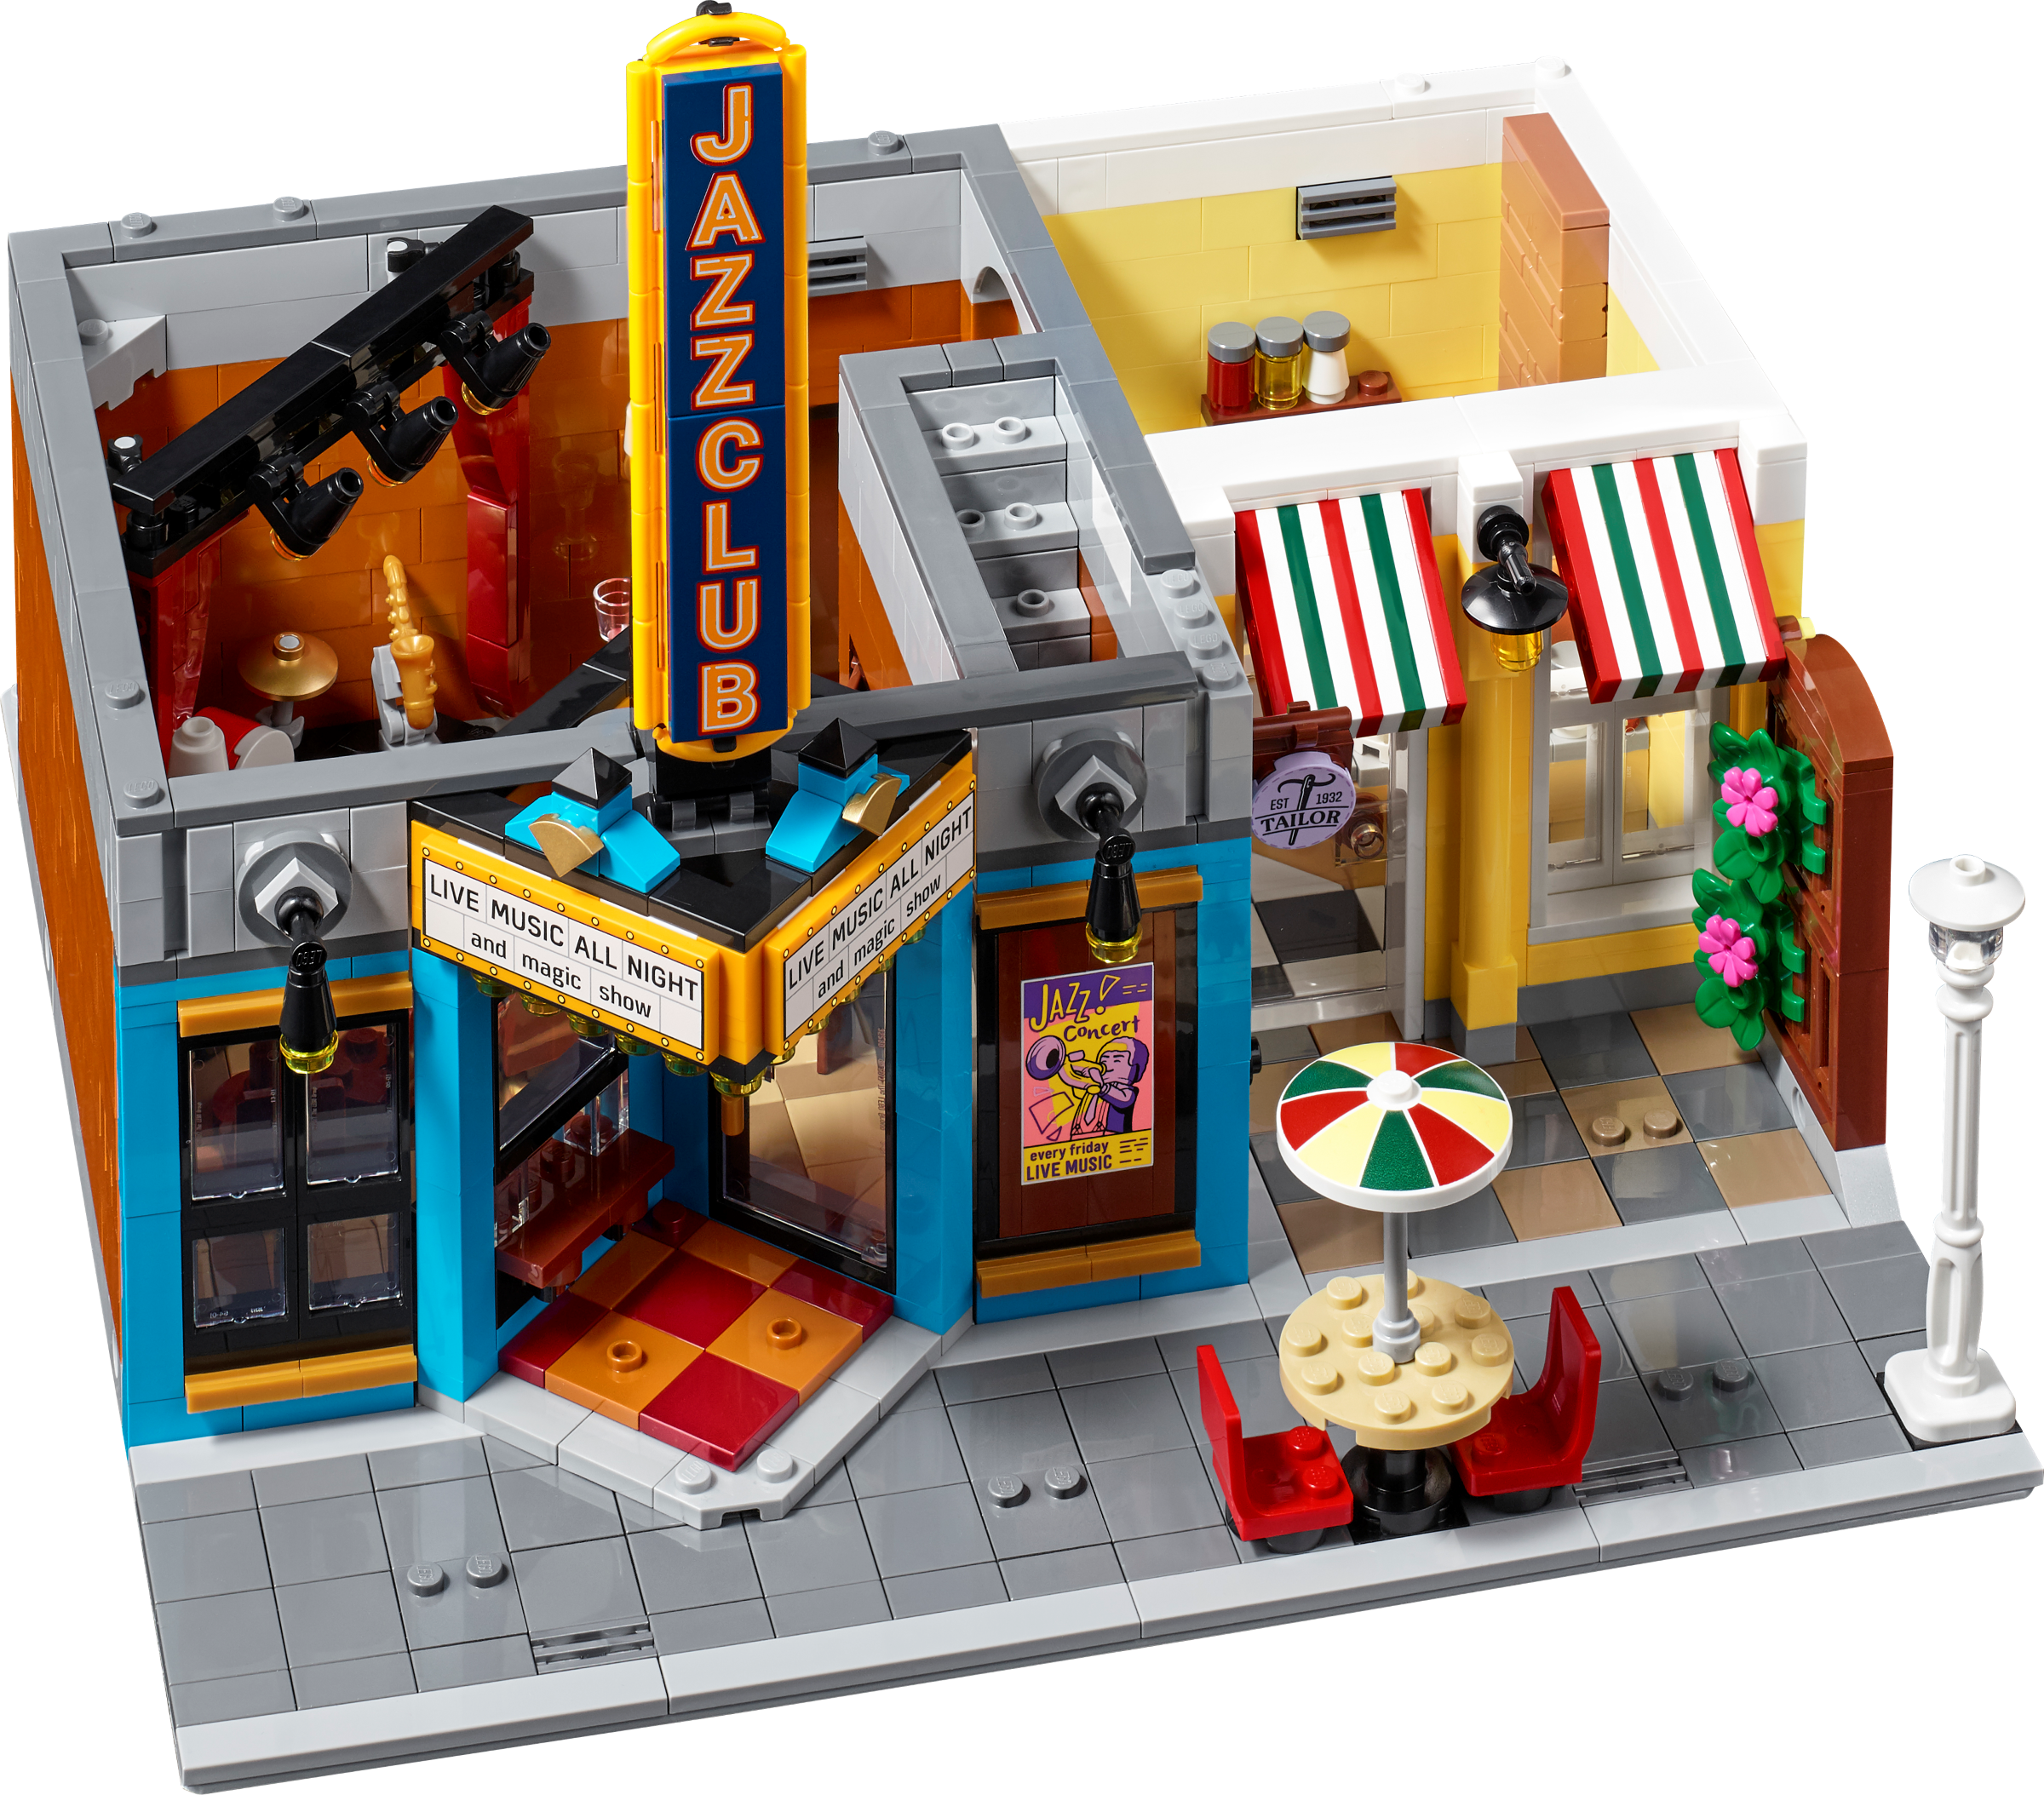 Countryside Supersonic hastighed en lille Jazz Club 10312 | LEGO® Icons | Buy online at the Official LEGO® Shop US